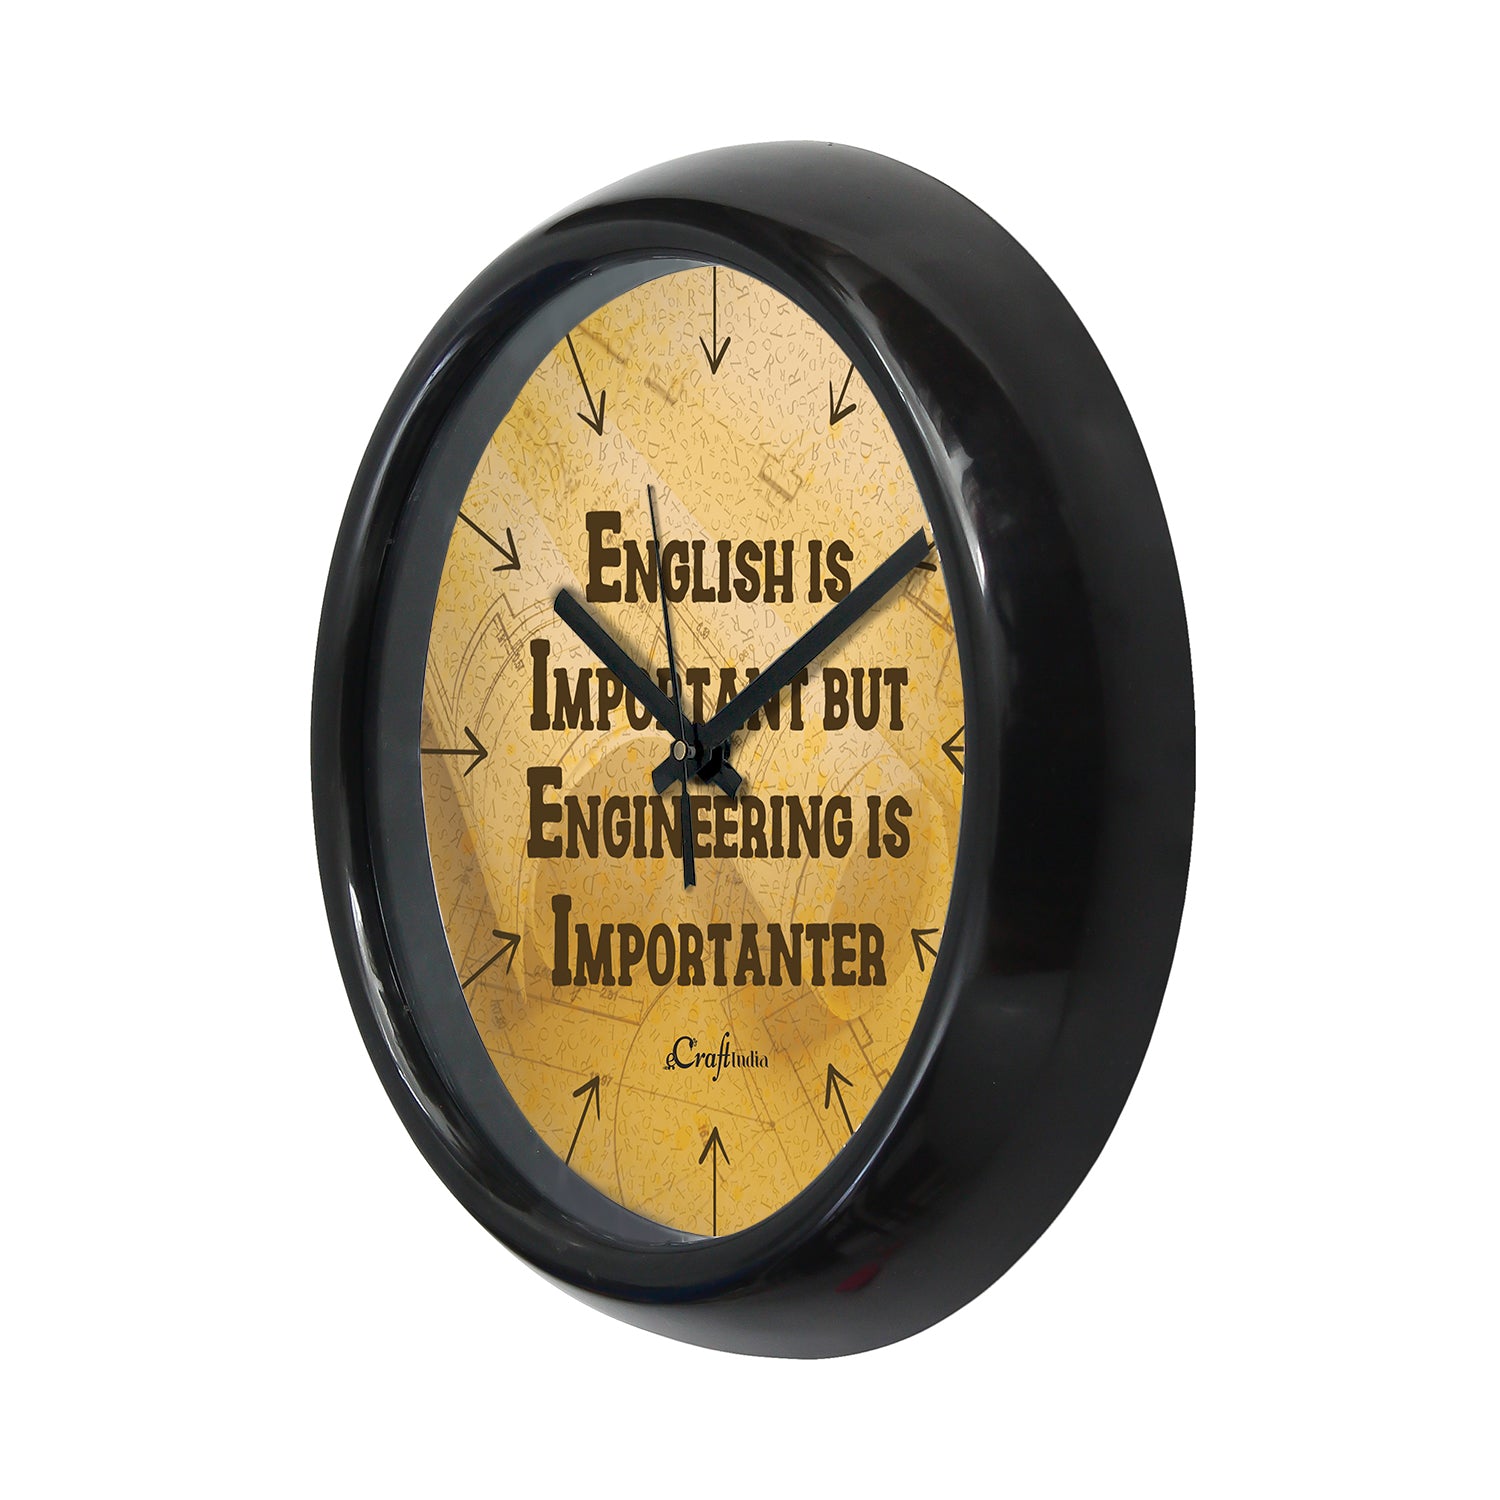 "English Is Important But Engineering is Importanter" Designer Round Analog Black Wall Clock 4